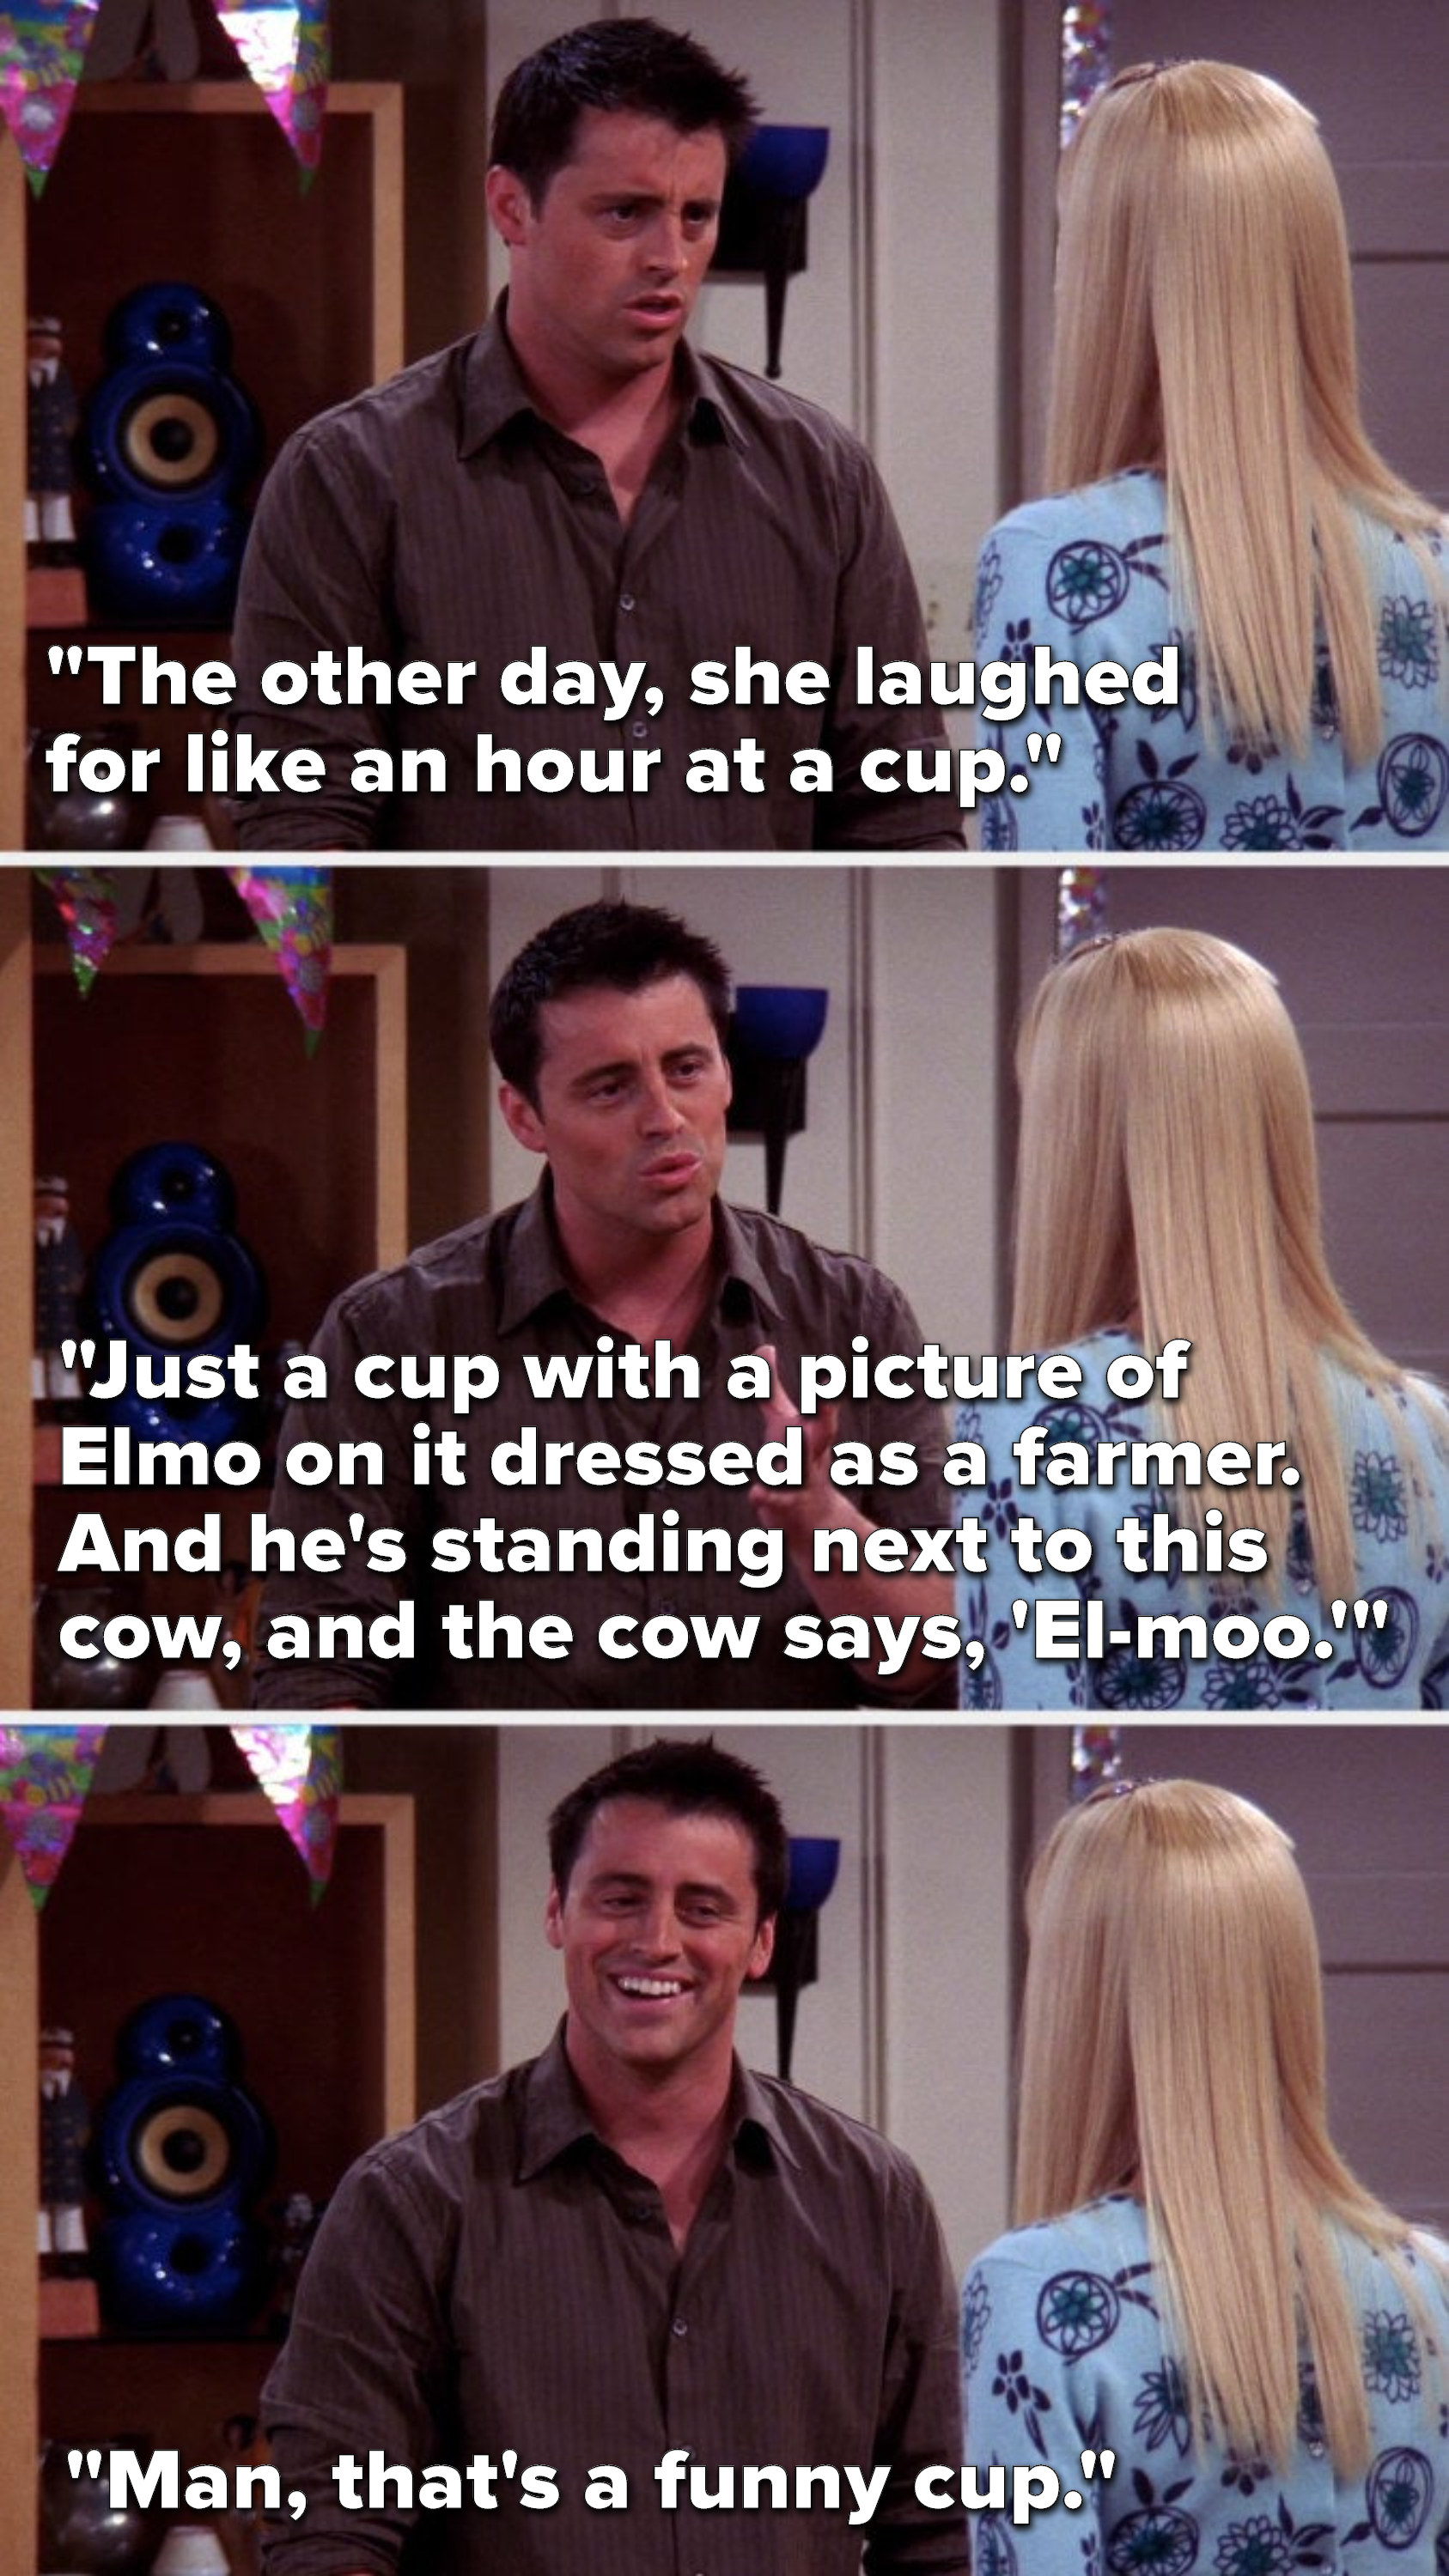 Joey says, &quot;The other day, she laughed for like an hour at a cup, just a cup with a picture of Elmo on it dressed as a farmer, and he&#x27;s standing next to this cow, and the cow says, &#x27;El-moo,&#x27; then Joey laughs and says, &quot;Man, that&#x27;s a funny cup&quot;